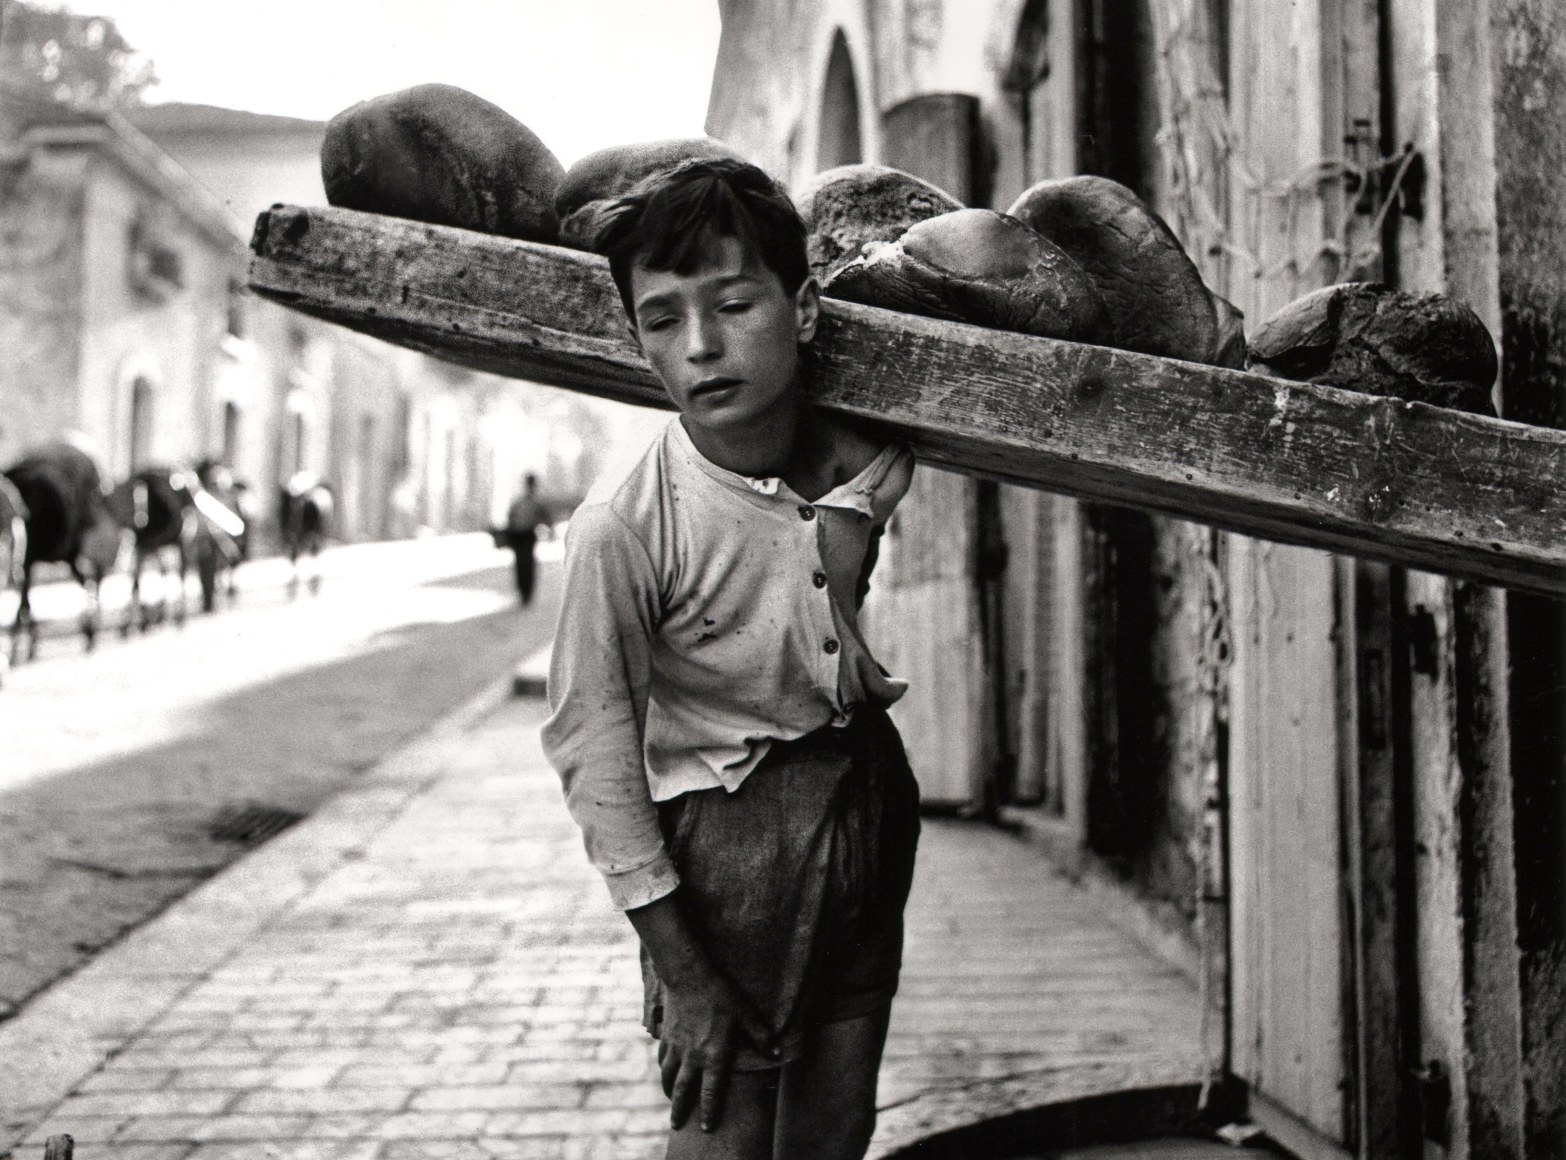 Nino Migliori, Bread Carrier, 1956. A boy carries bread on a wooden plank on his left shoulder.